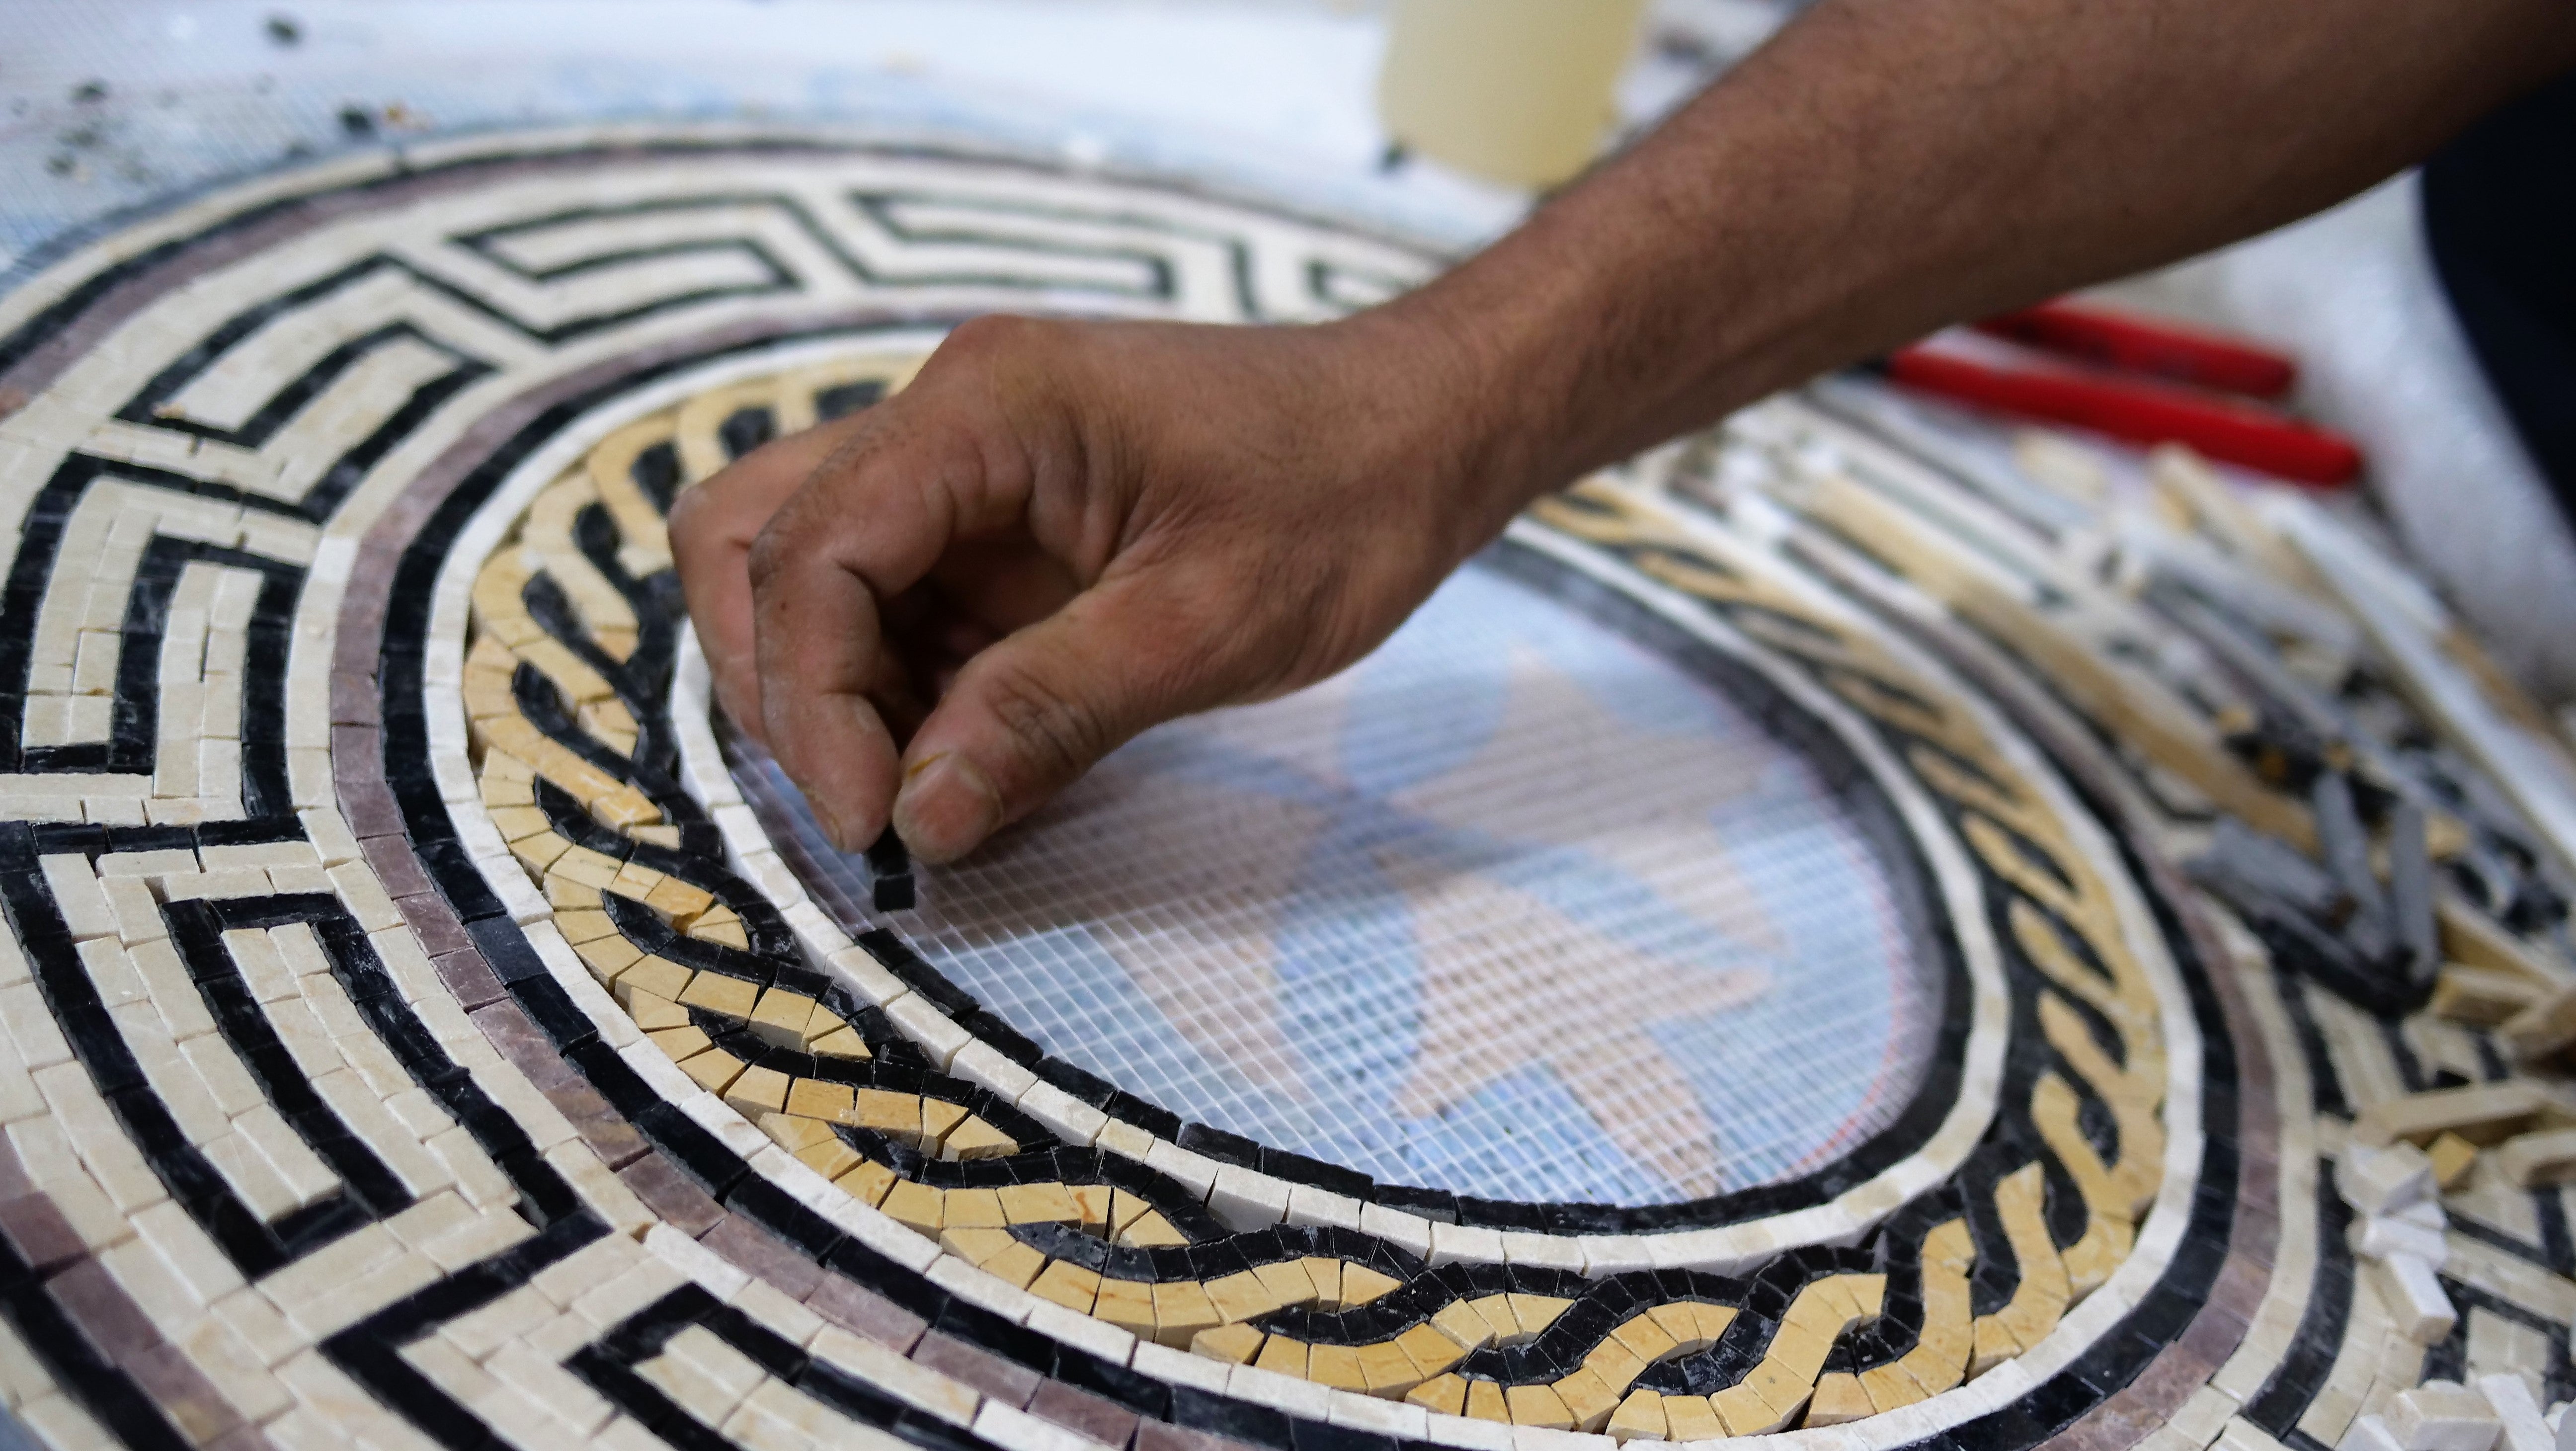 How to Make a Mosaic: Supplies and Tools